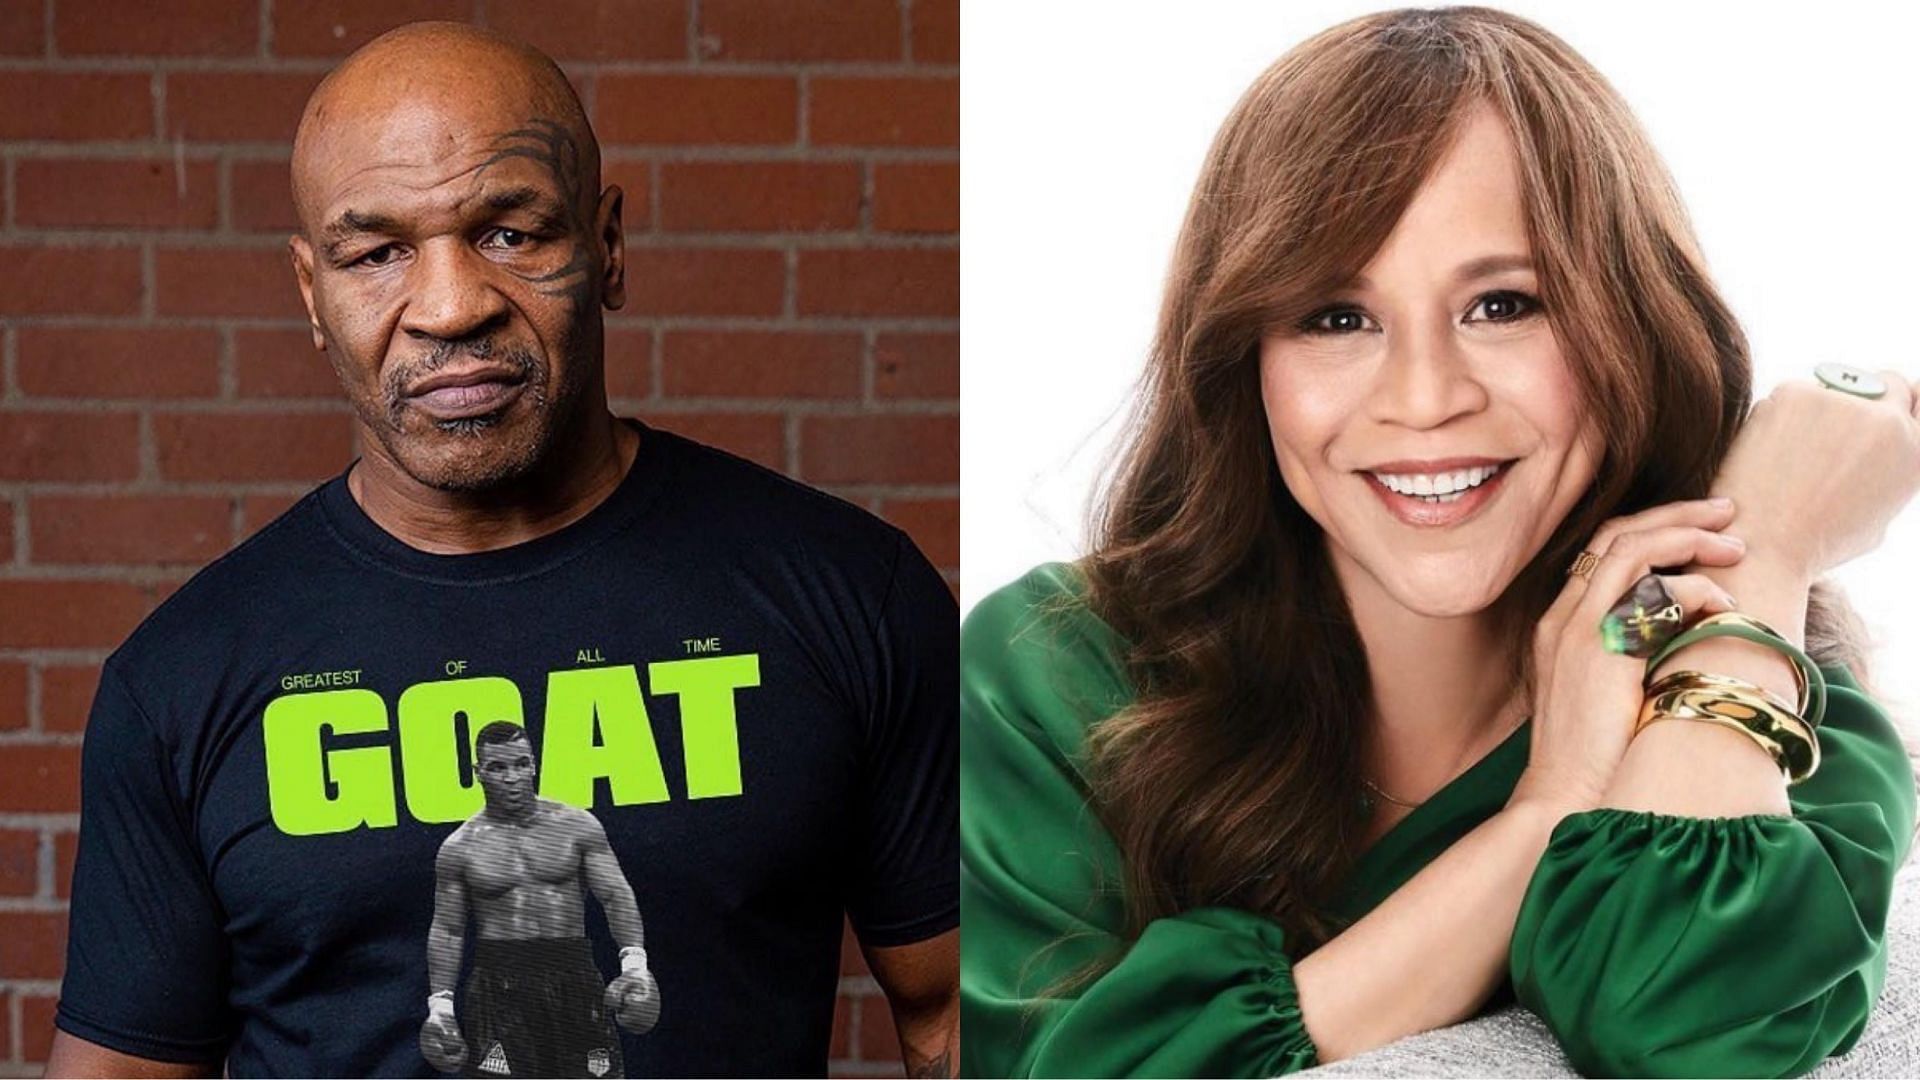 Mike Tyson (left, @miketyson), Rosie Perez (right, @rosieperezbrooklyn) [Images courtesy of Instagram]